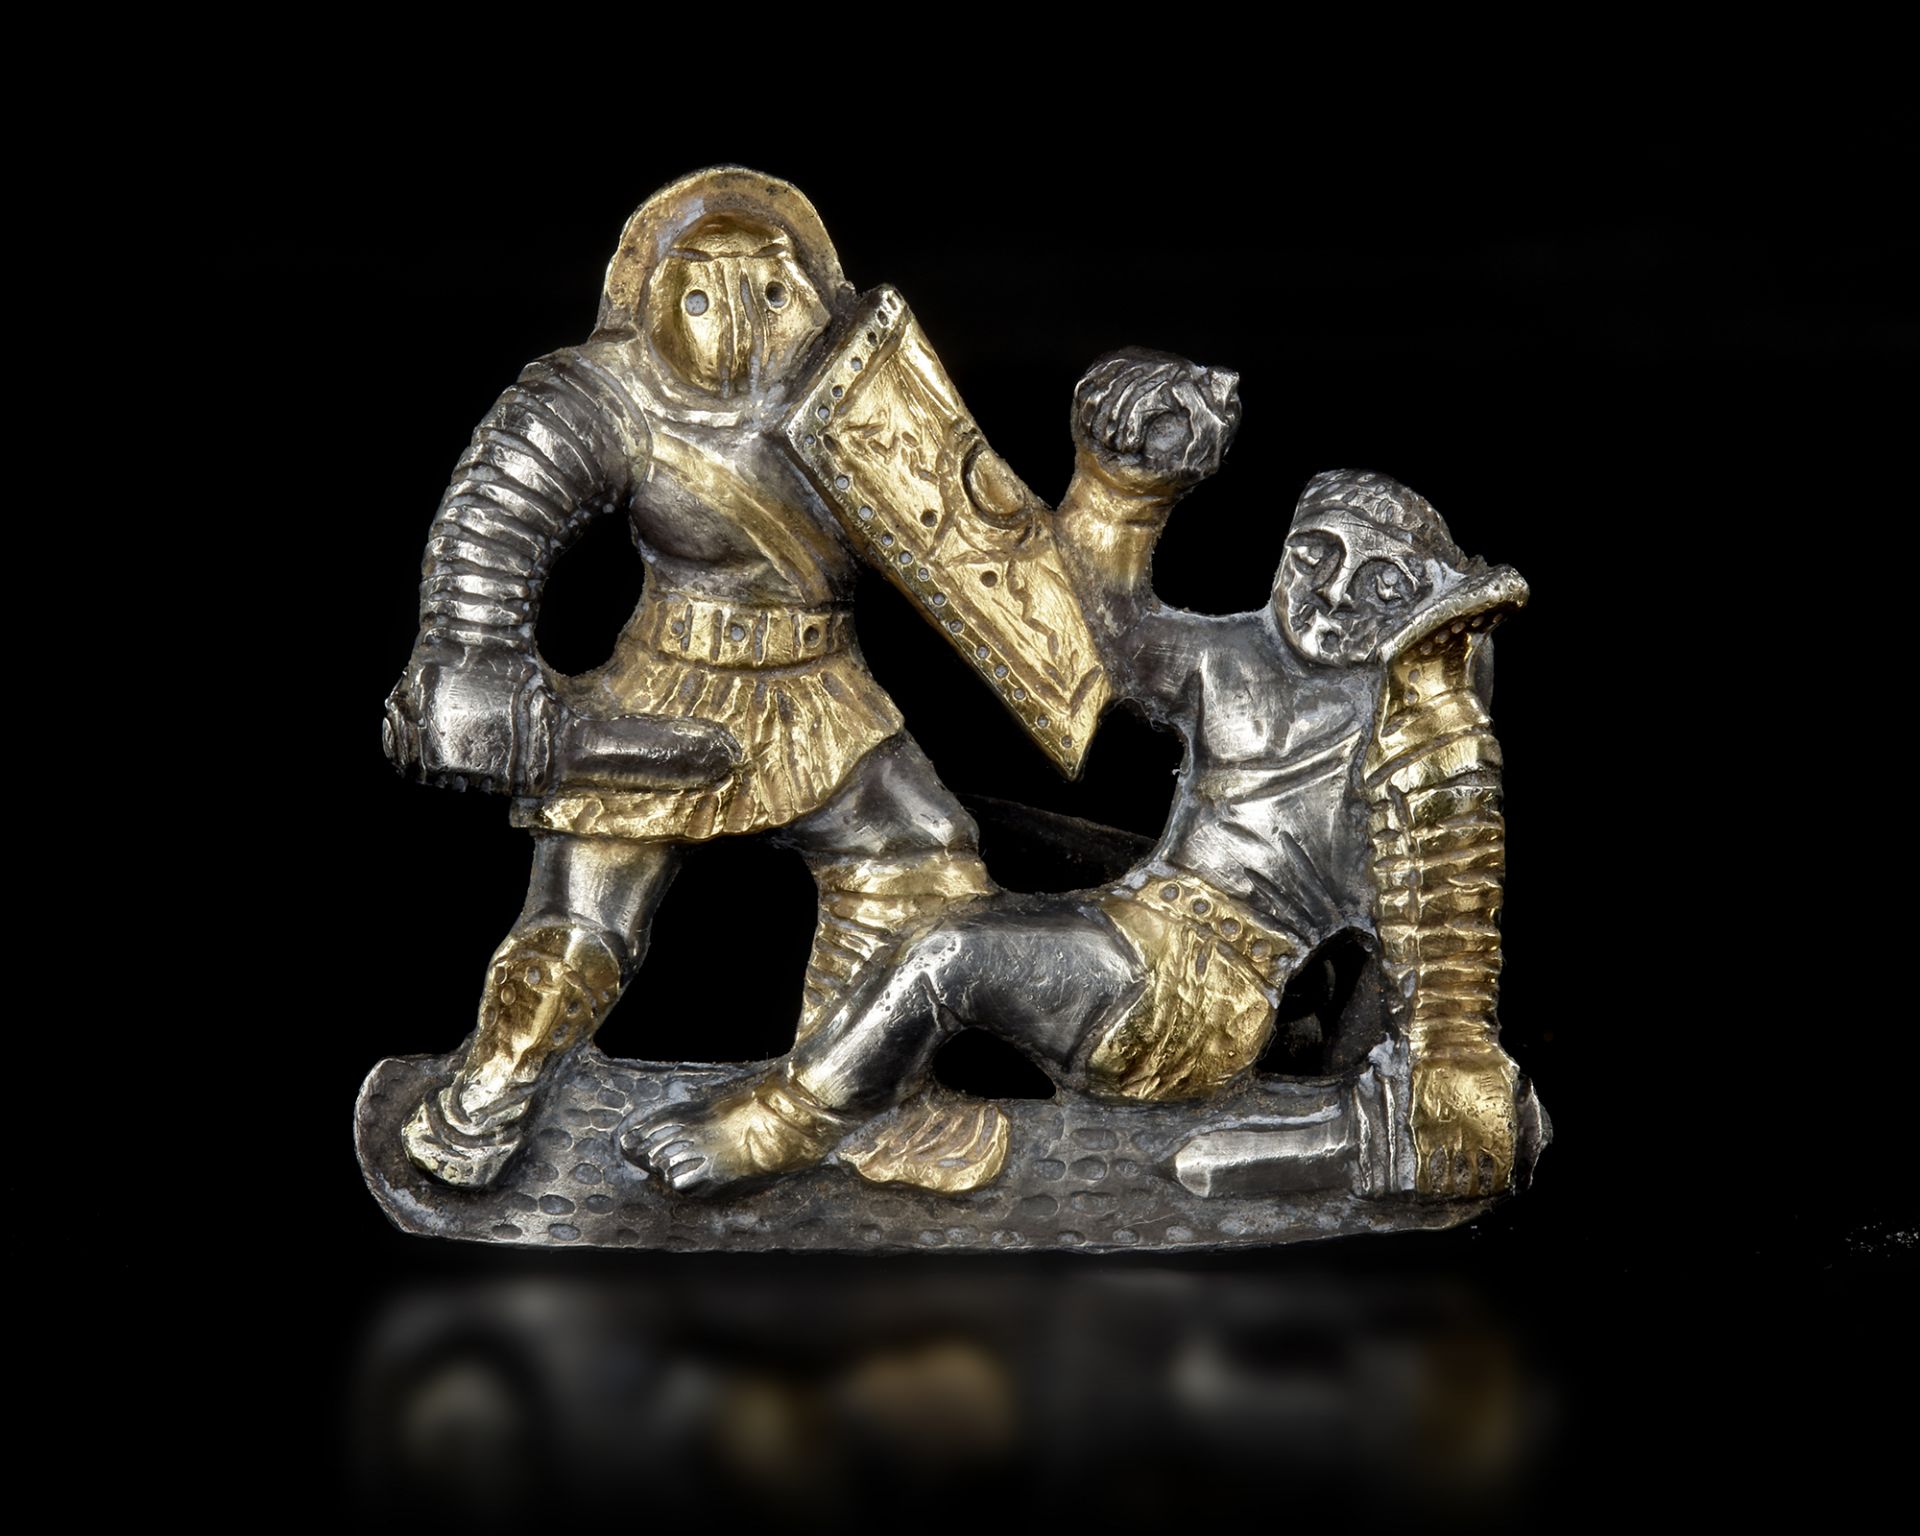 A SILVER GILT GLADIATORIAL BROOCH, 2ND-3RD CENTURY AD